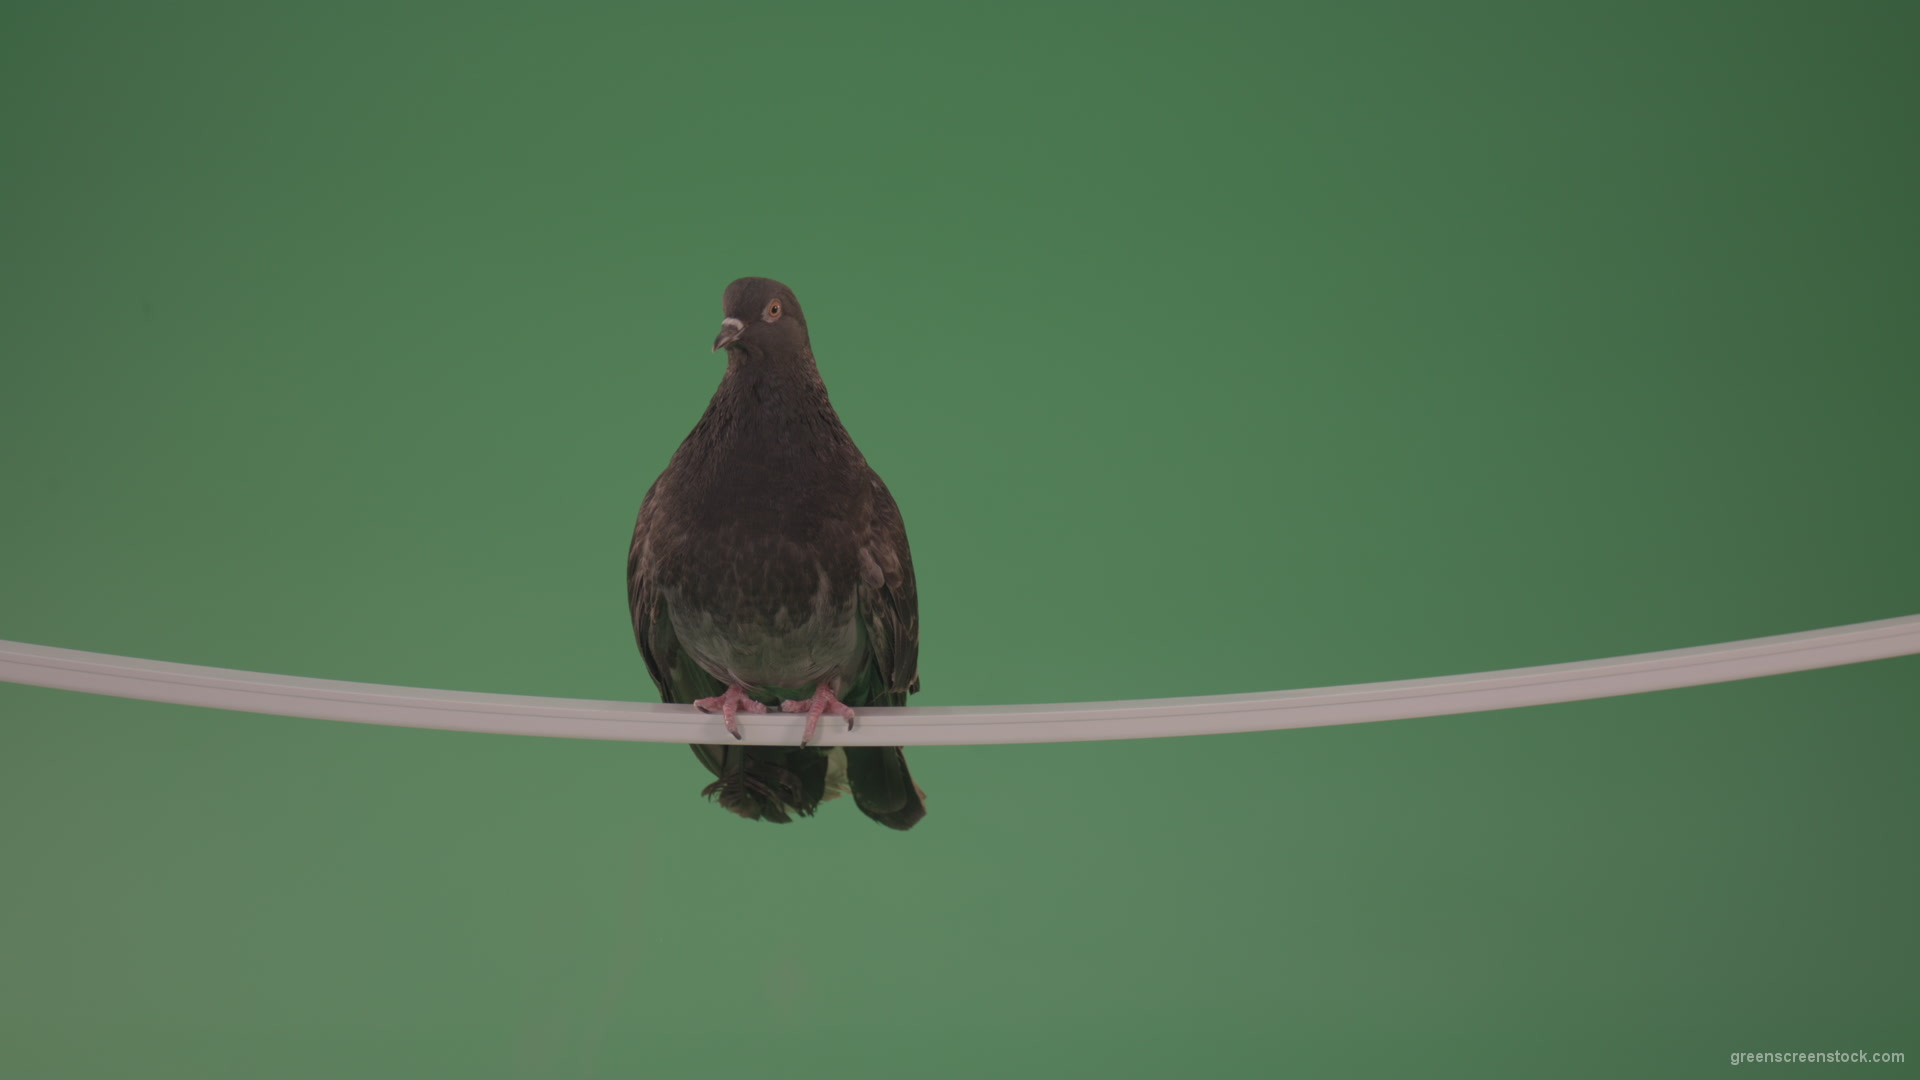 Sitting-bird-doves-on-a-pipe-in-a-big-city-isolated-on-chromakey-background_005 Green Screen Stock